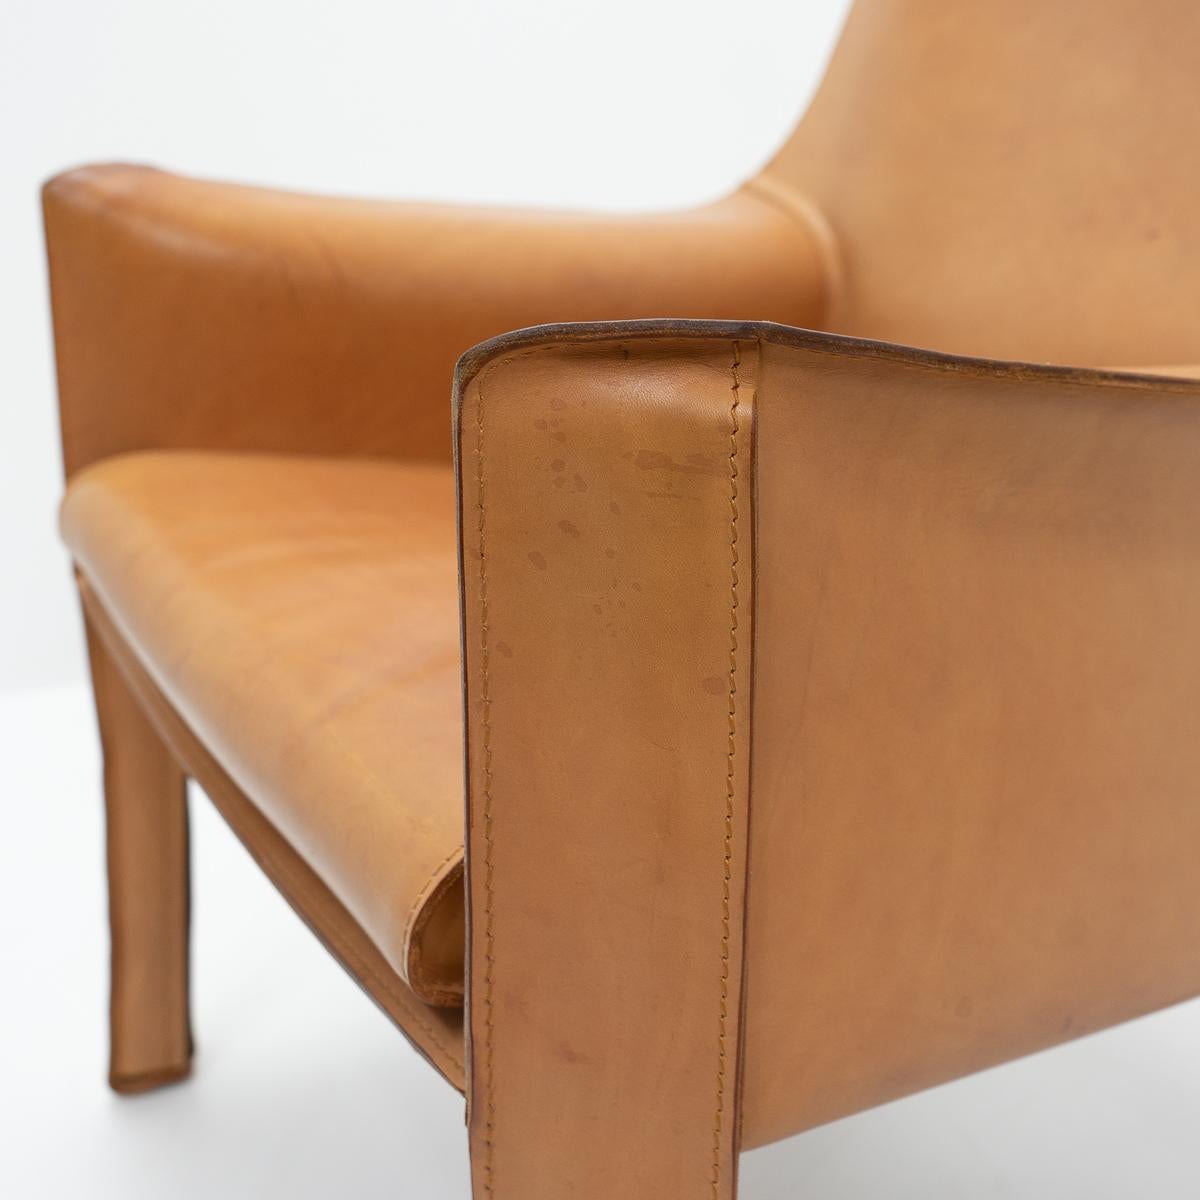 Two Cab 414 armchairs in cognac leather by Mario Bellini for Cassina.

These very comfortable lounge chairs are built up with a tubular steel frame over which foam and thick saddle leather is fitted. The leather skin is kept in place with zippers on